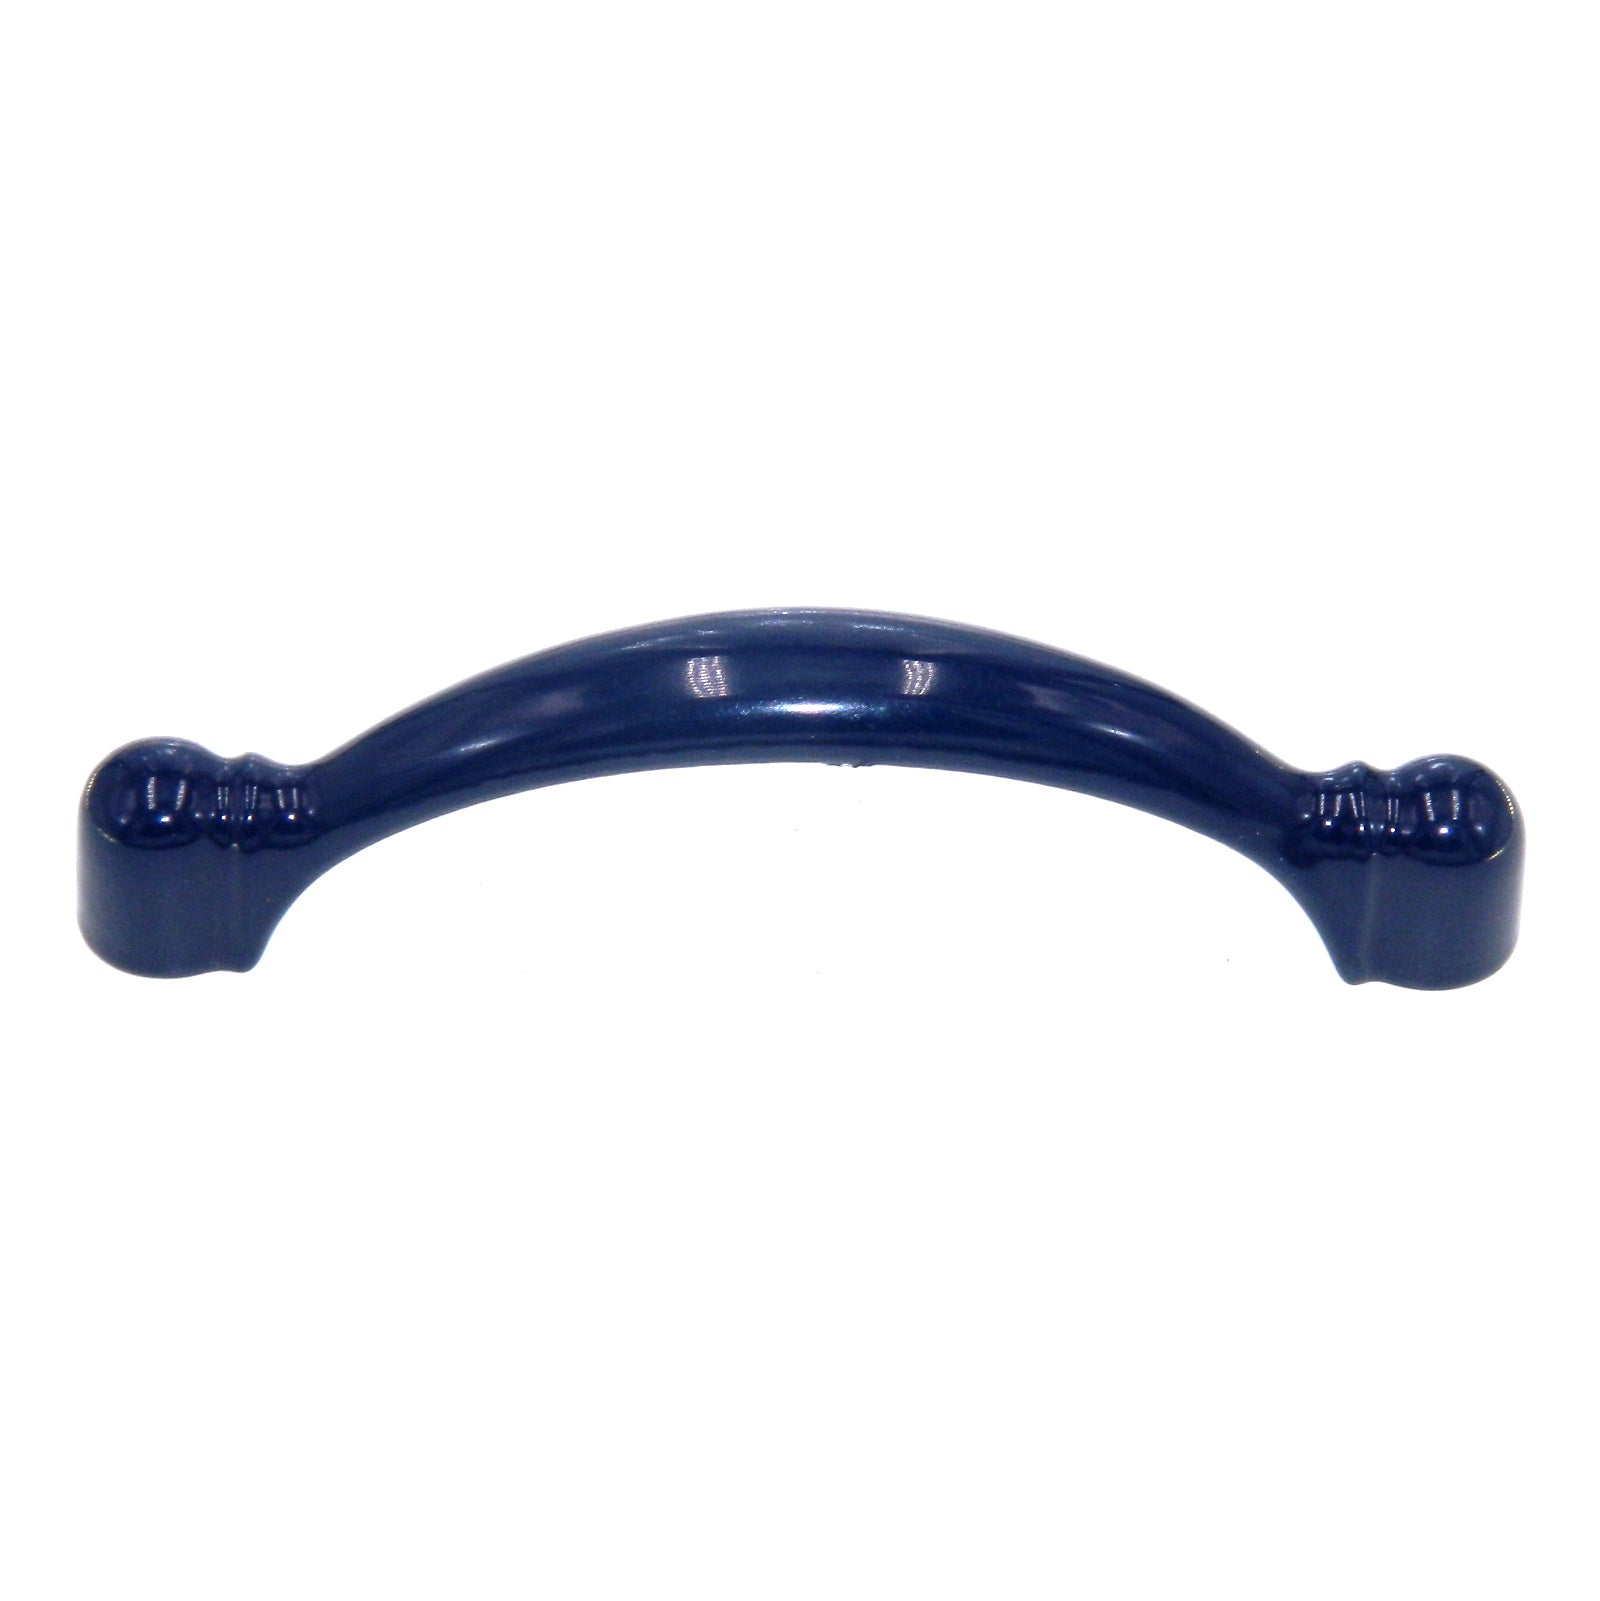 Amerock Colors Navy Blue 3" Ctr. Cabinet Arch Pull Handle BP3441-NB